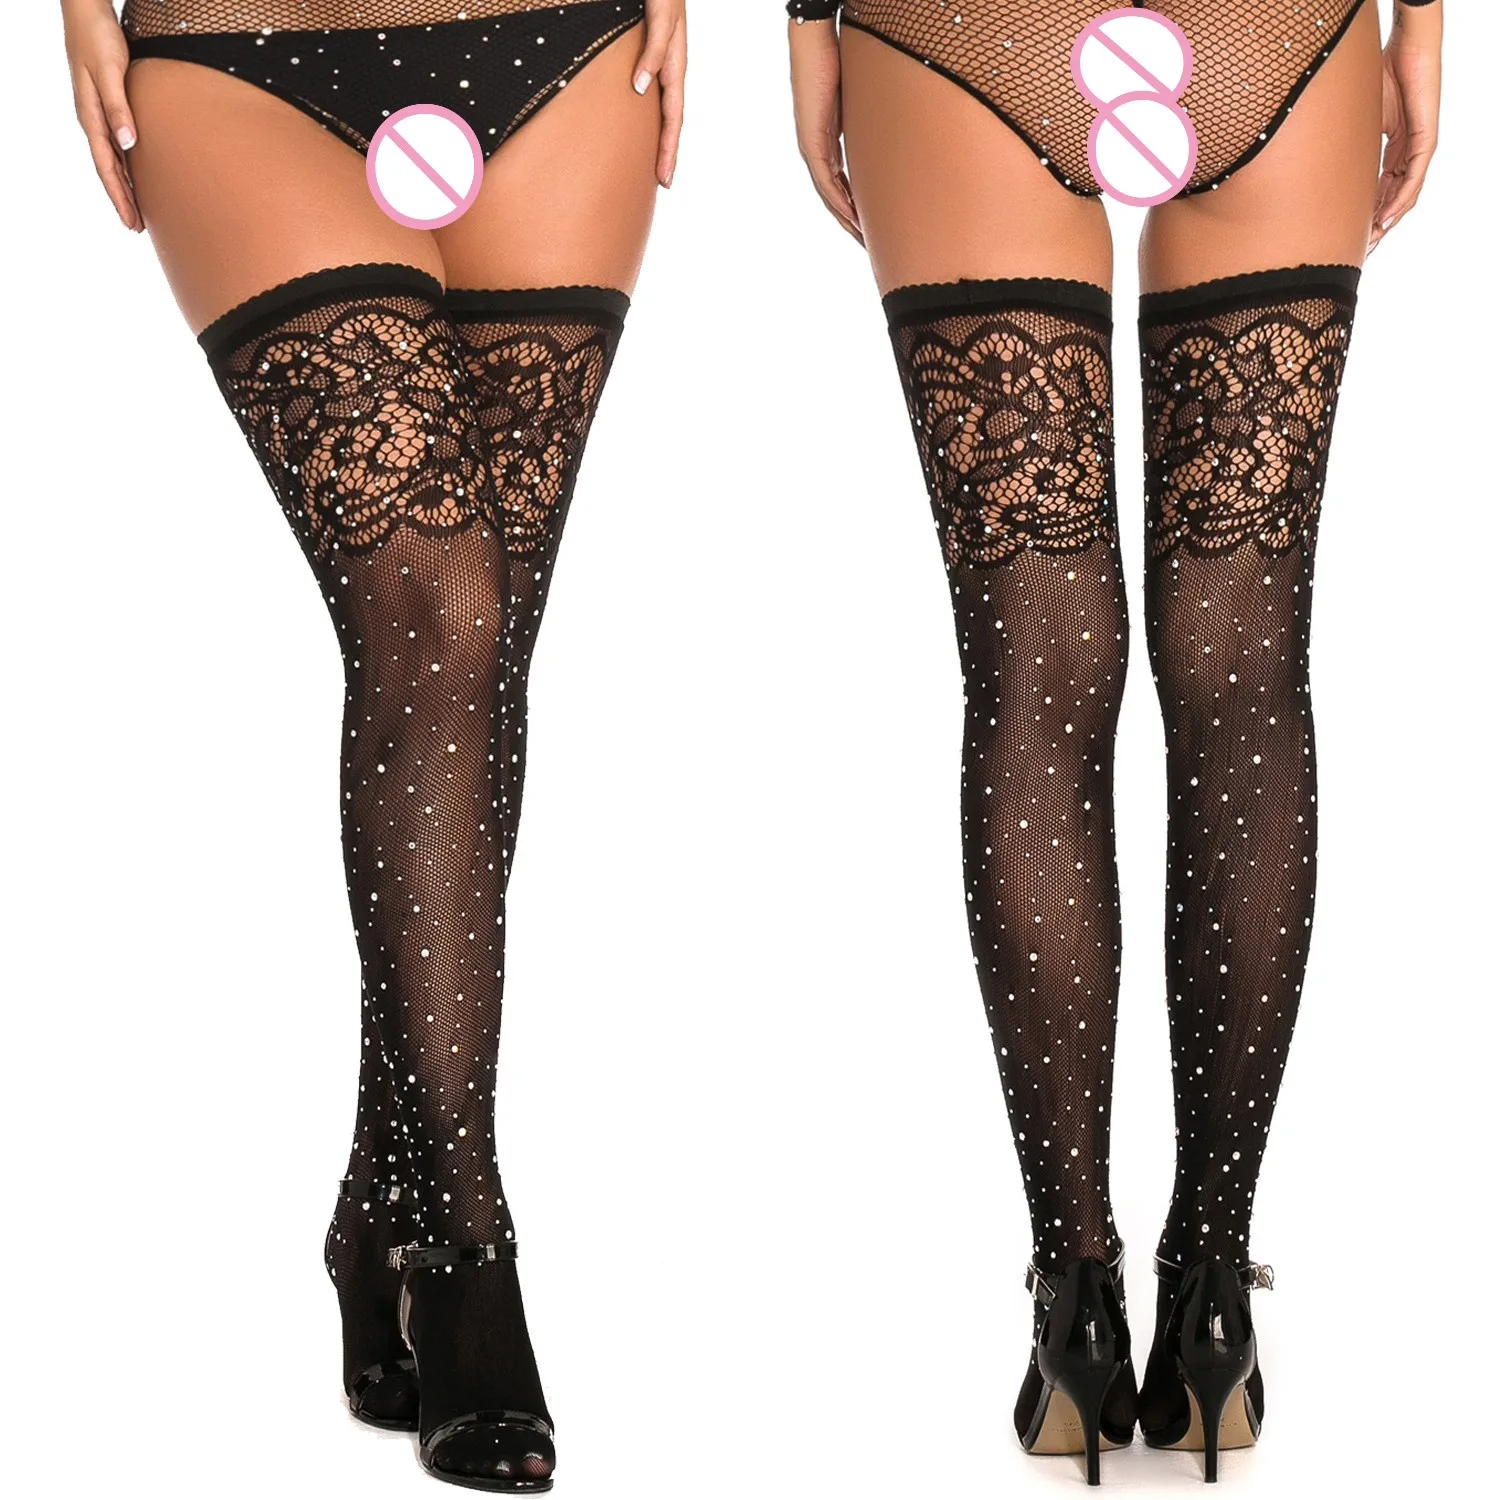 Women Transparent Crystal Lace Fishnet Rhinestone Over The Knee Long